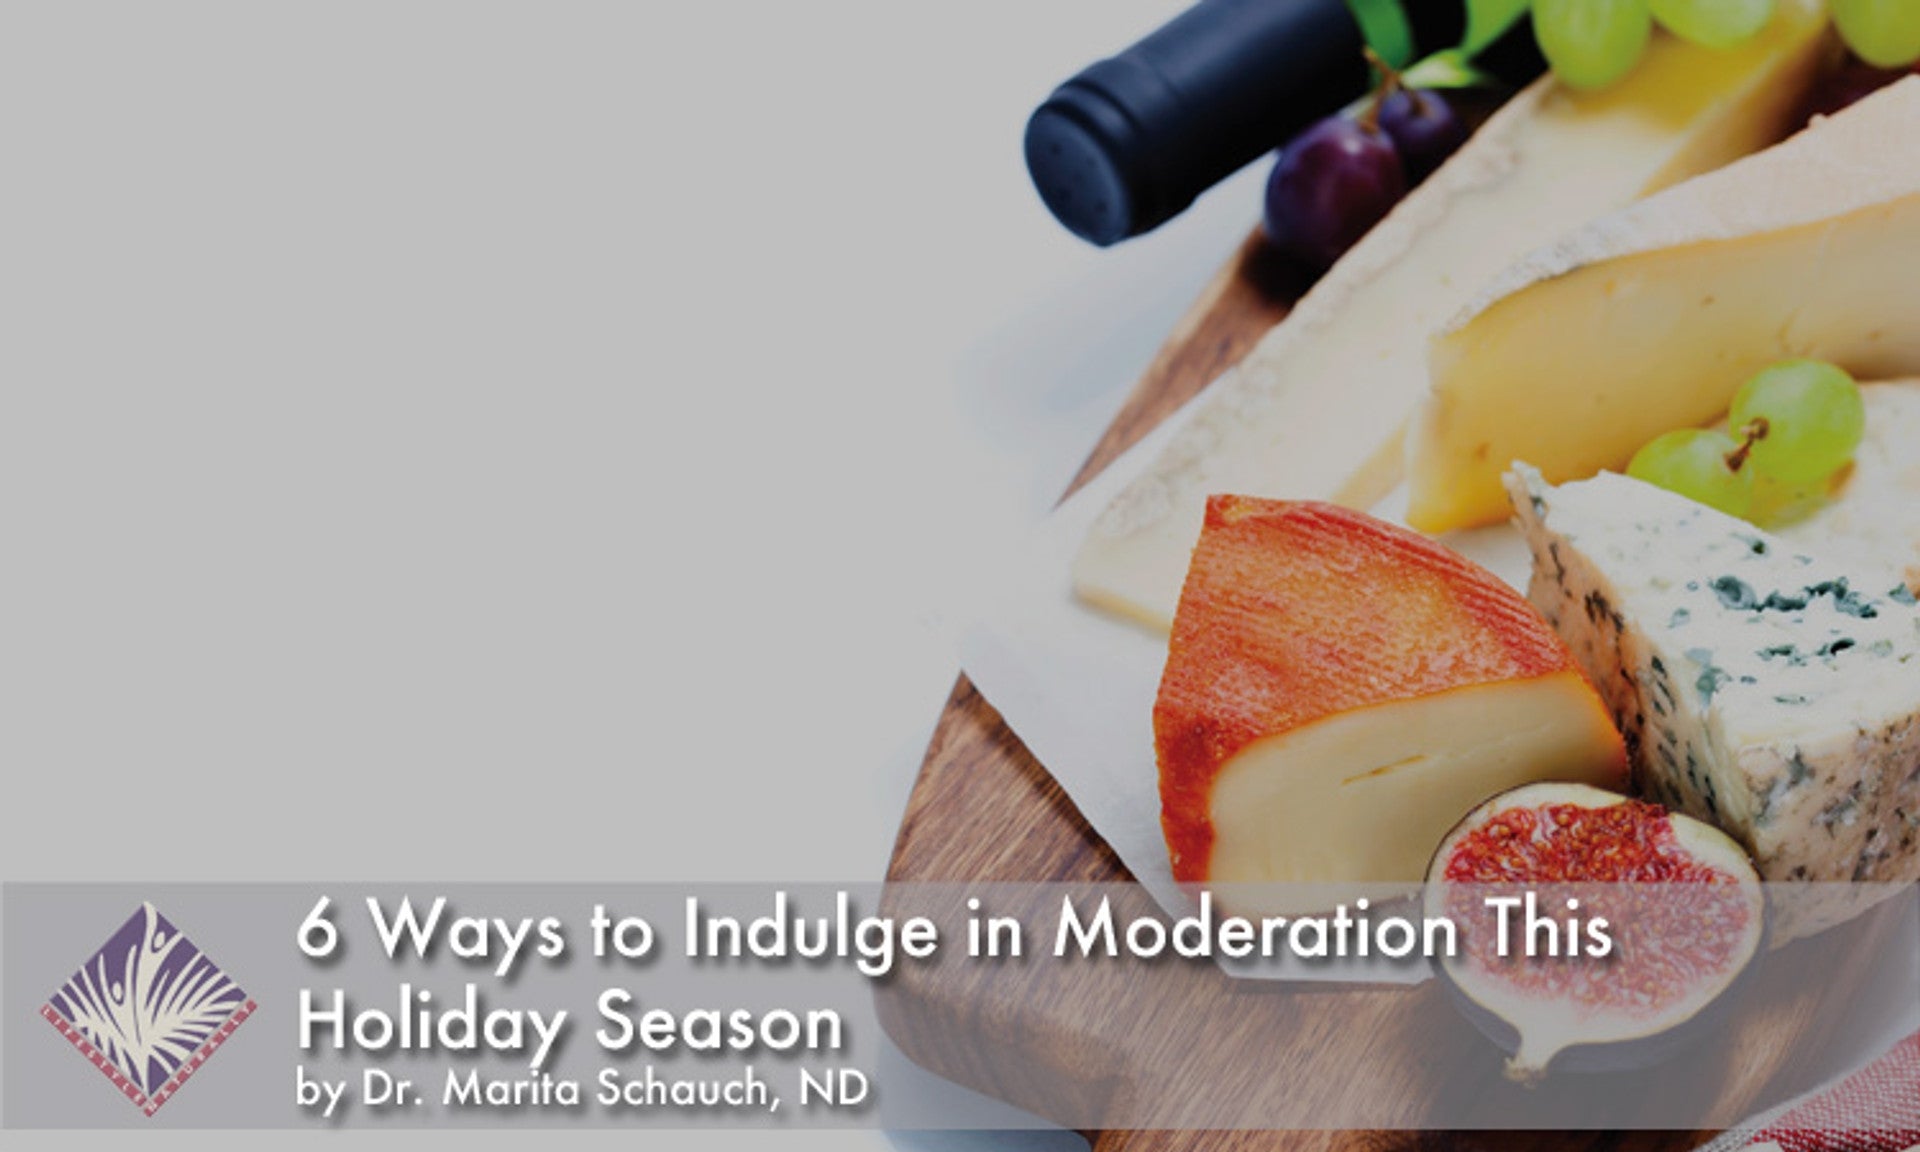 6 Ways to Indulge in Moderation This Holiday Season